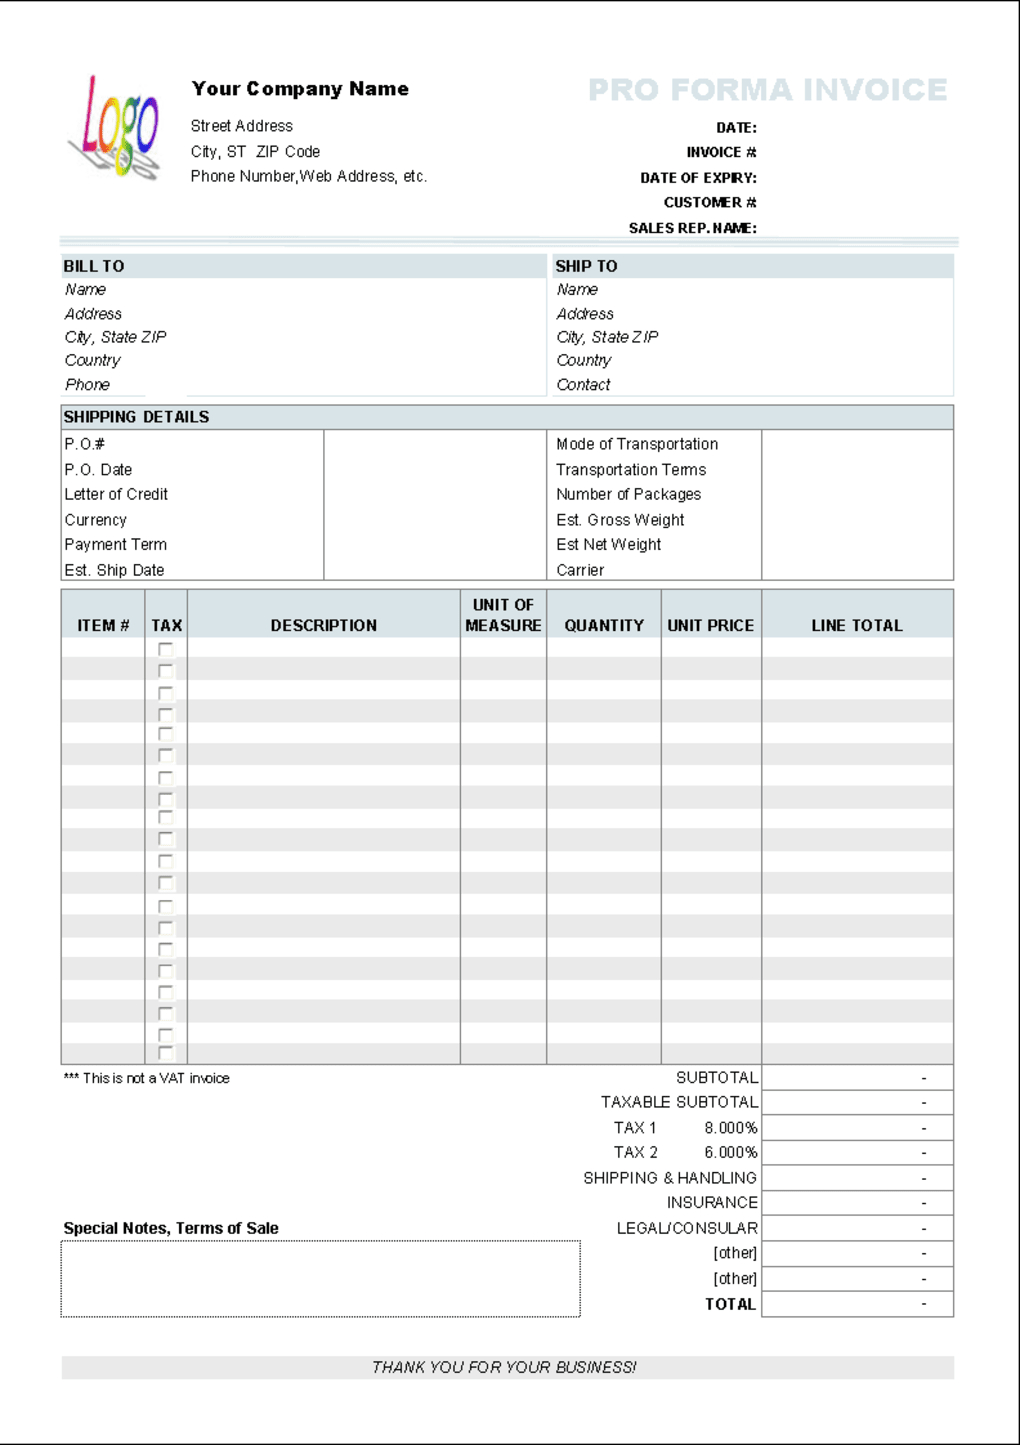 Free Proforma Invoice Template Download Spreadsheet Pro Intended For Invoice Template Xls Free Download